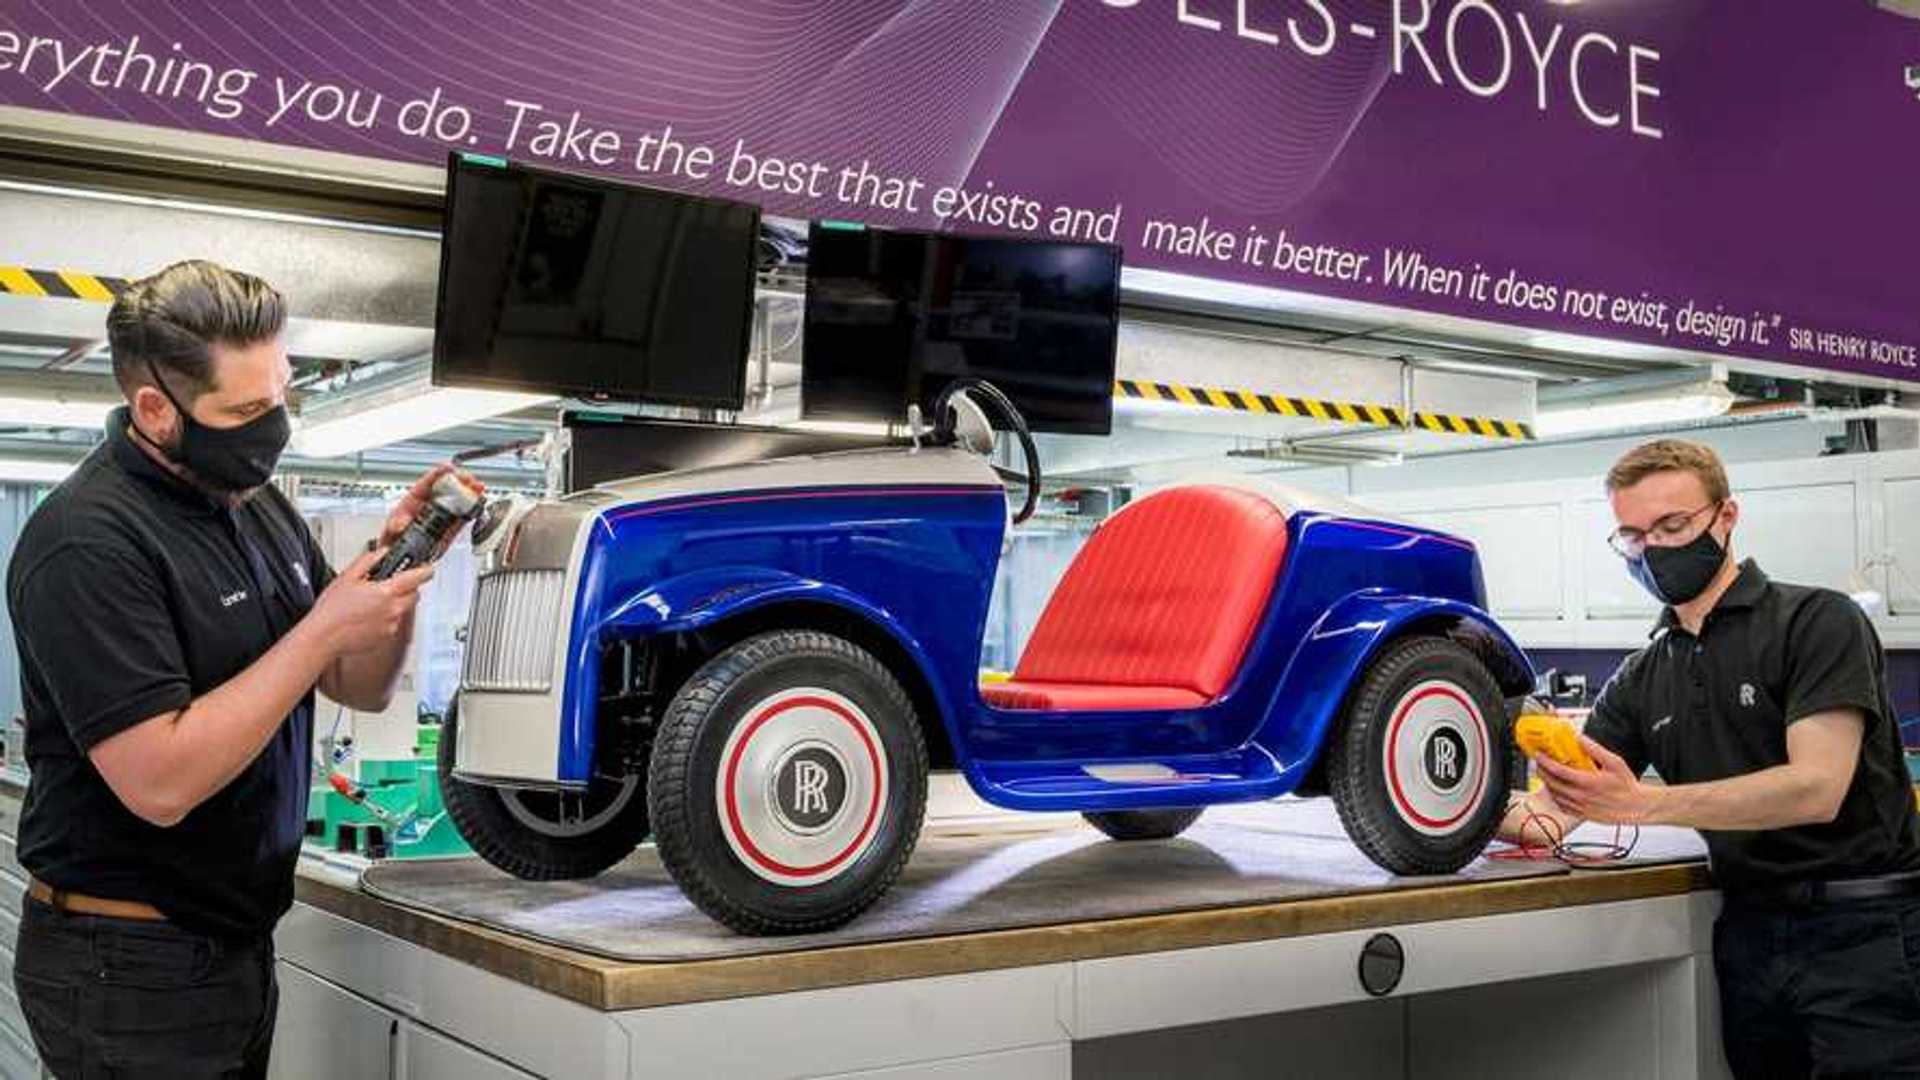 Rolls-Royce's One-Off Electric Vehicle Returns to Factory for Repair Work